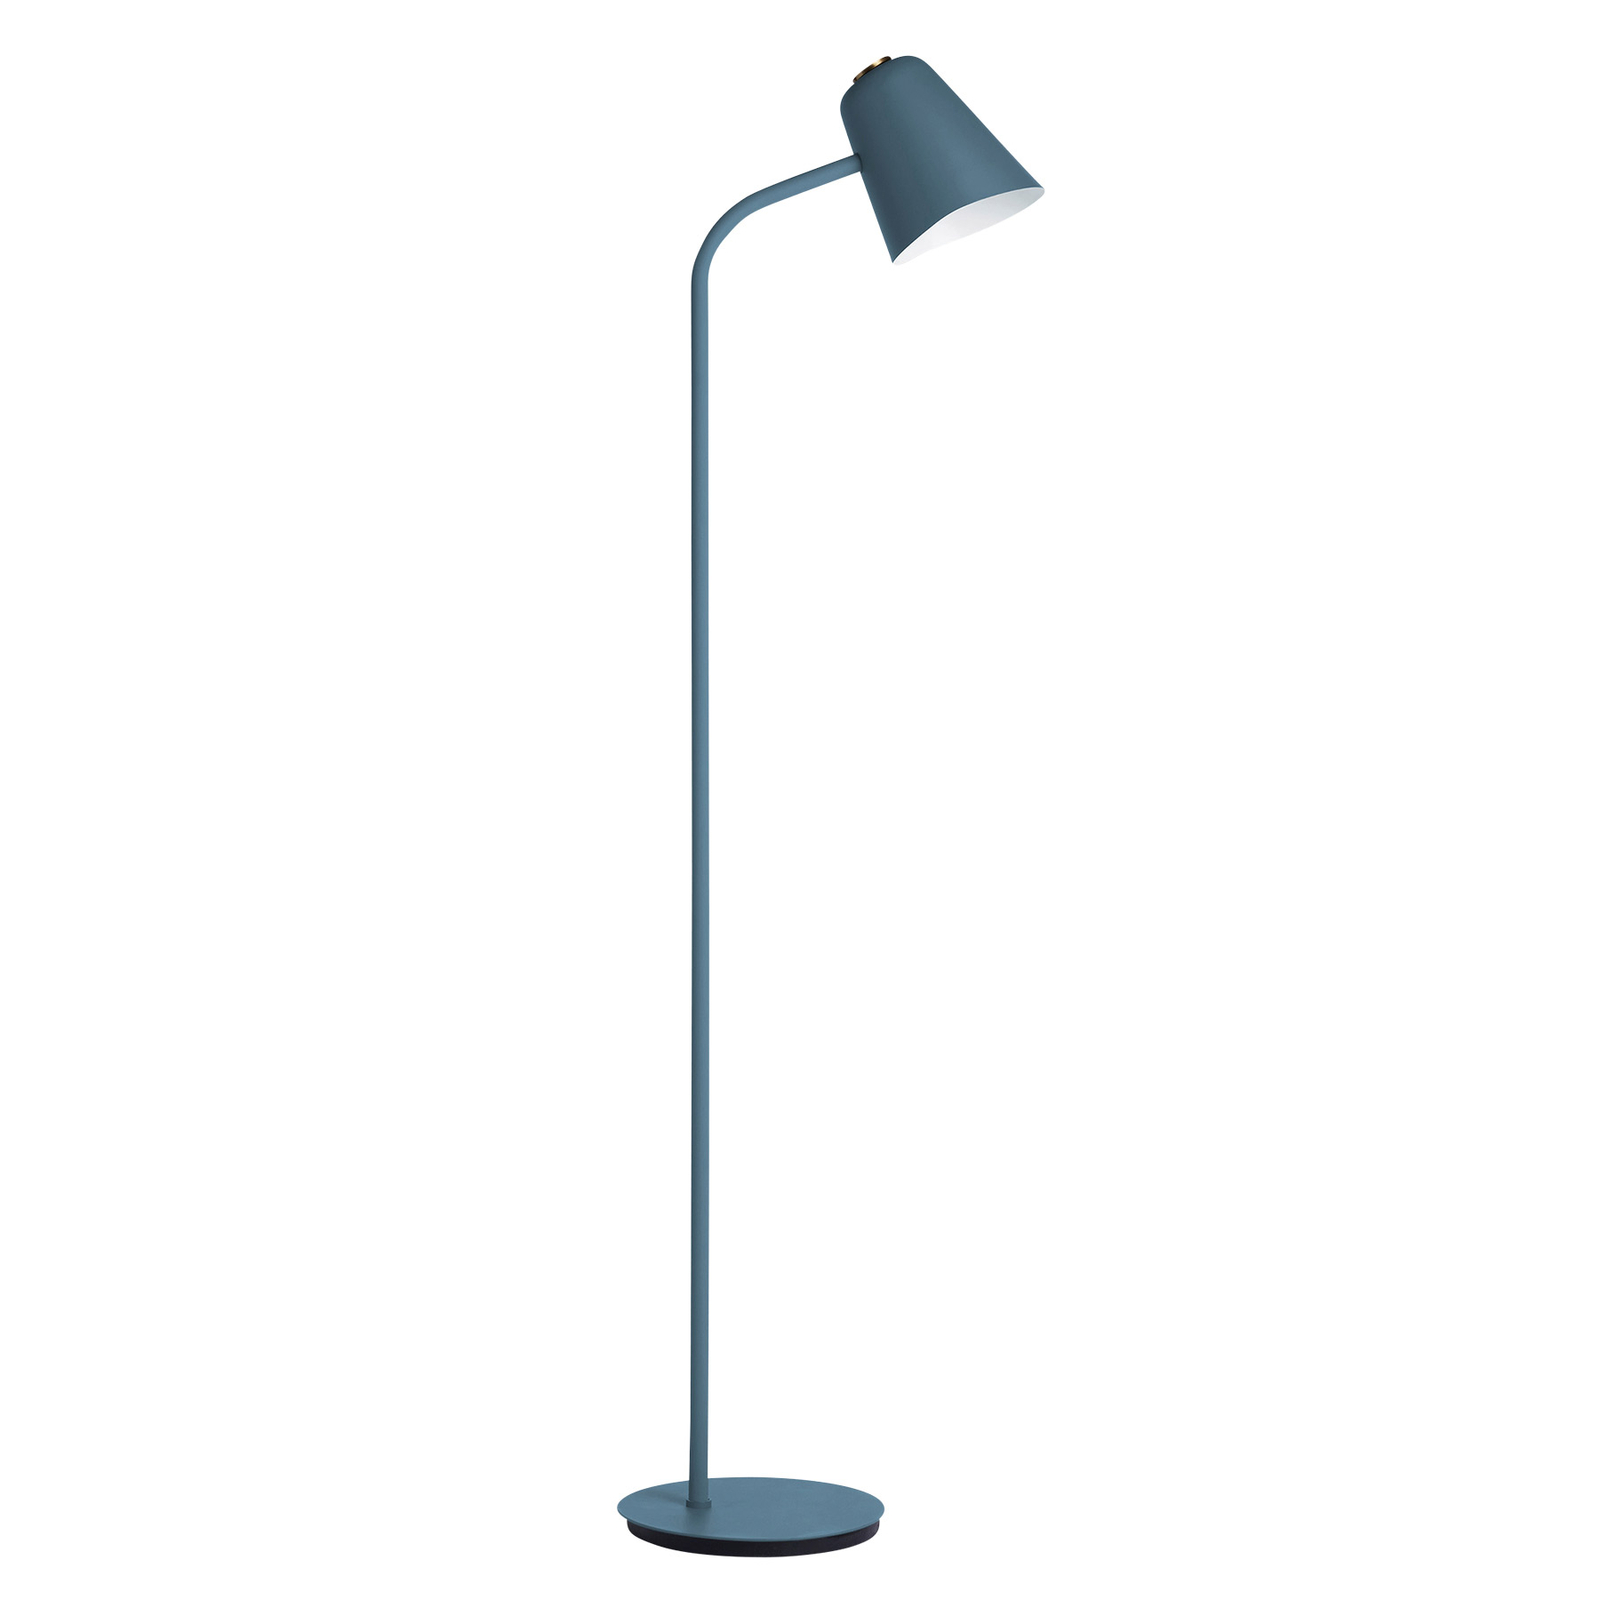 Northern Me dim LED floor lamp dimmable teal